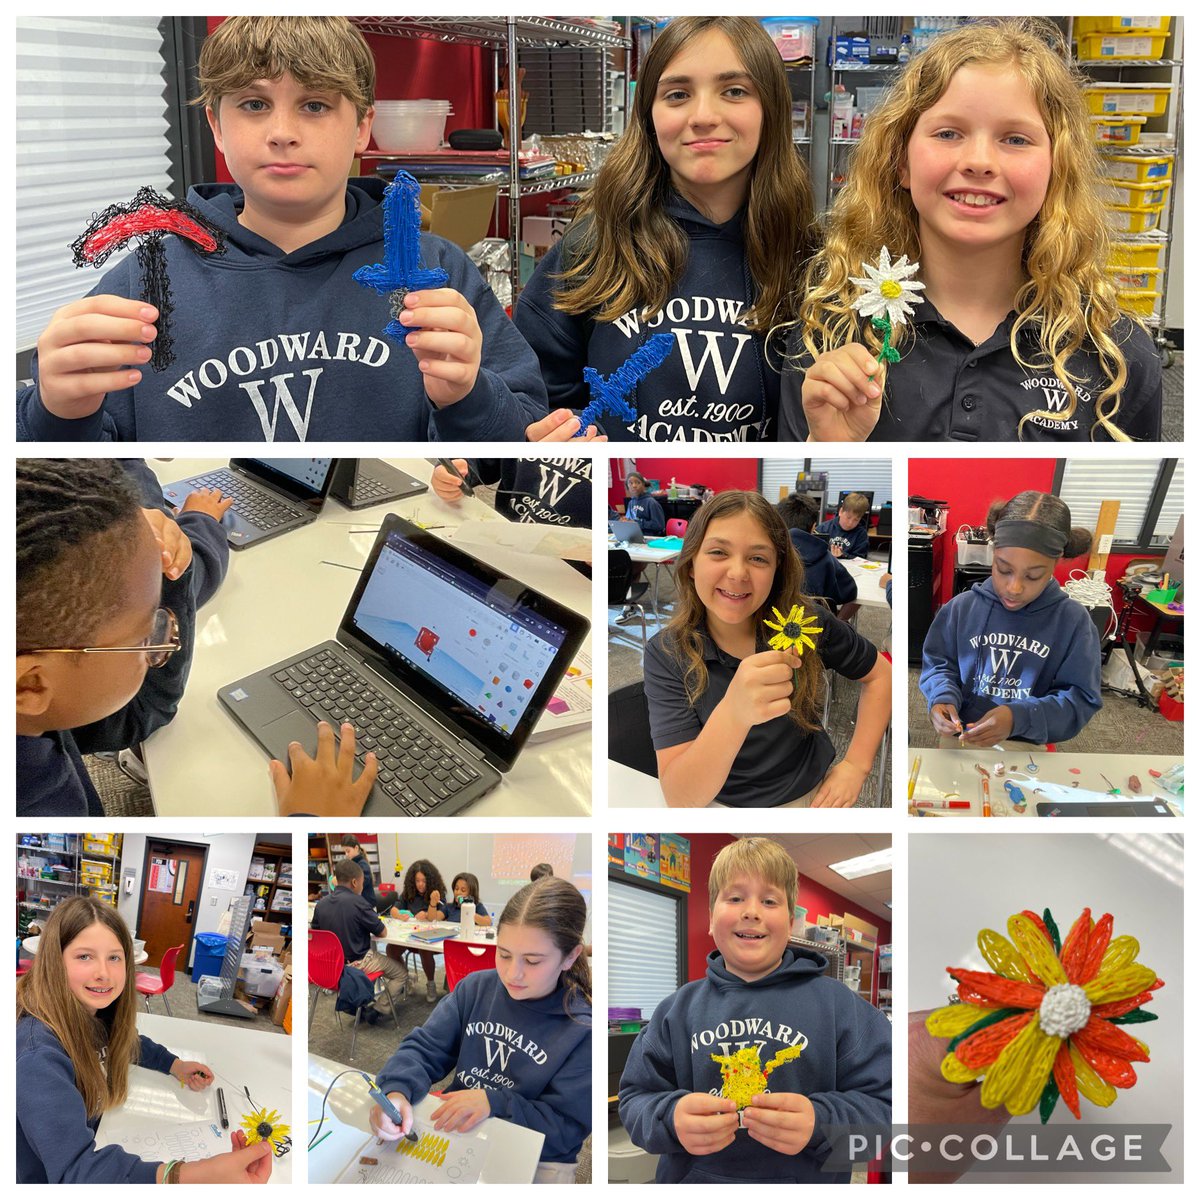 3D pens and Tinkercad projects as we finish up our geometry unit! @WoodwardAcademy #WoodwardWay @TeacherTammyF @Natalie_STEAM @dandyphillips13